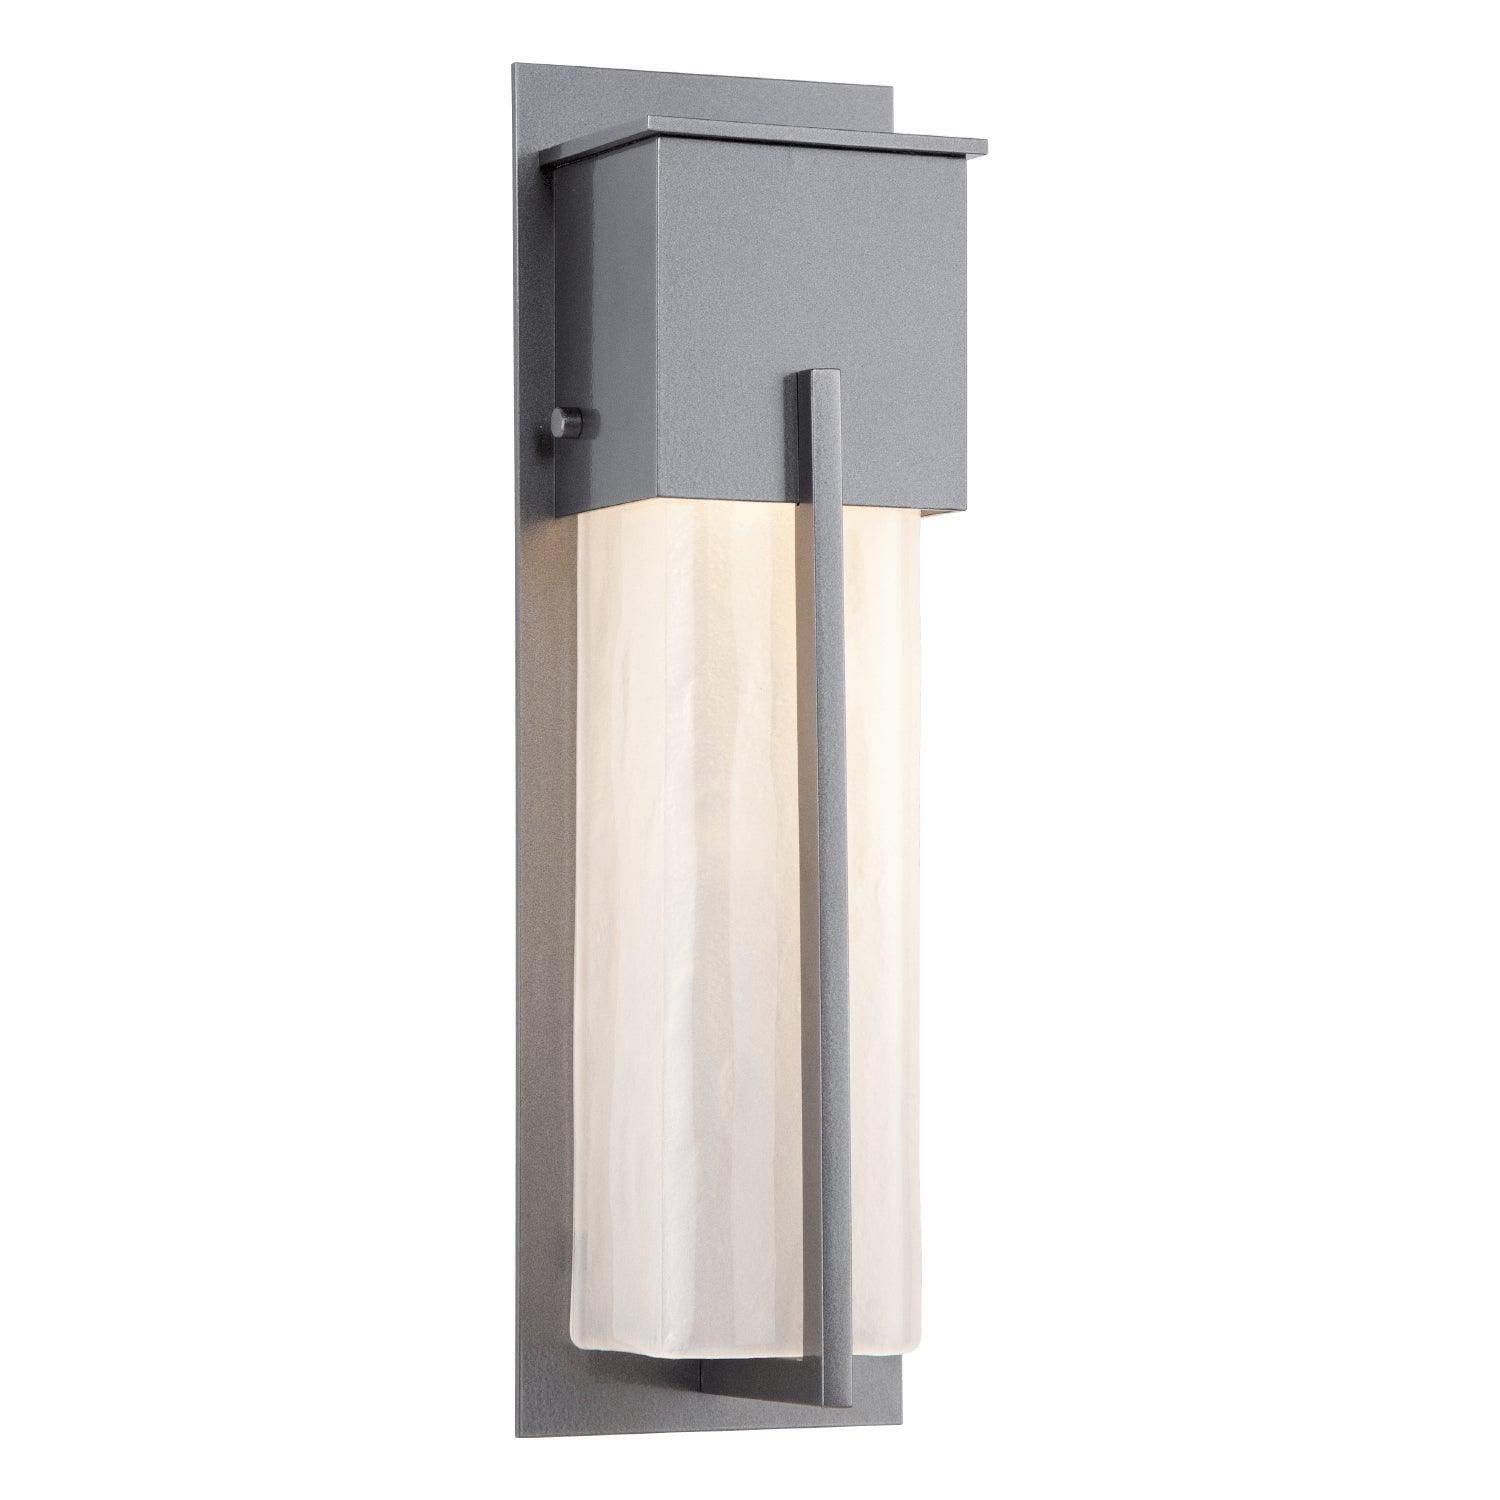 Hammerton Studio - Outdoor Short Square Cover Sconce with Metalwork - ODB0055-16-AG-FG-G1 | Montreal Lighting & Hardware